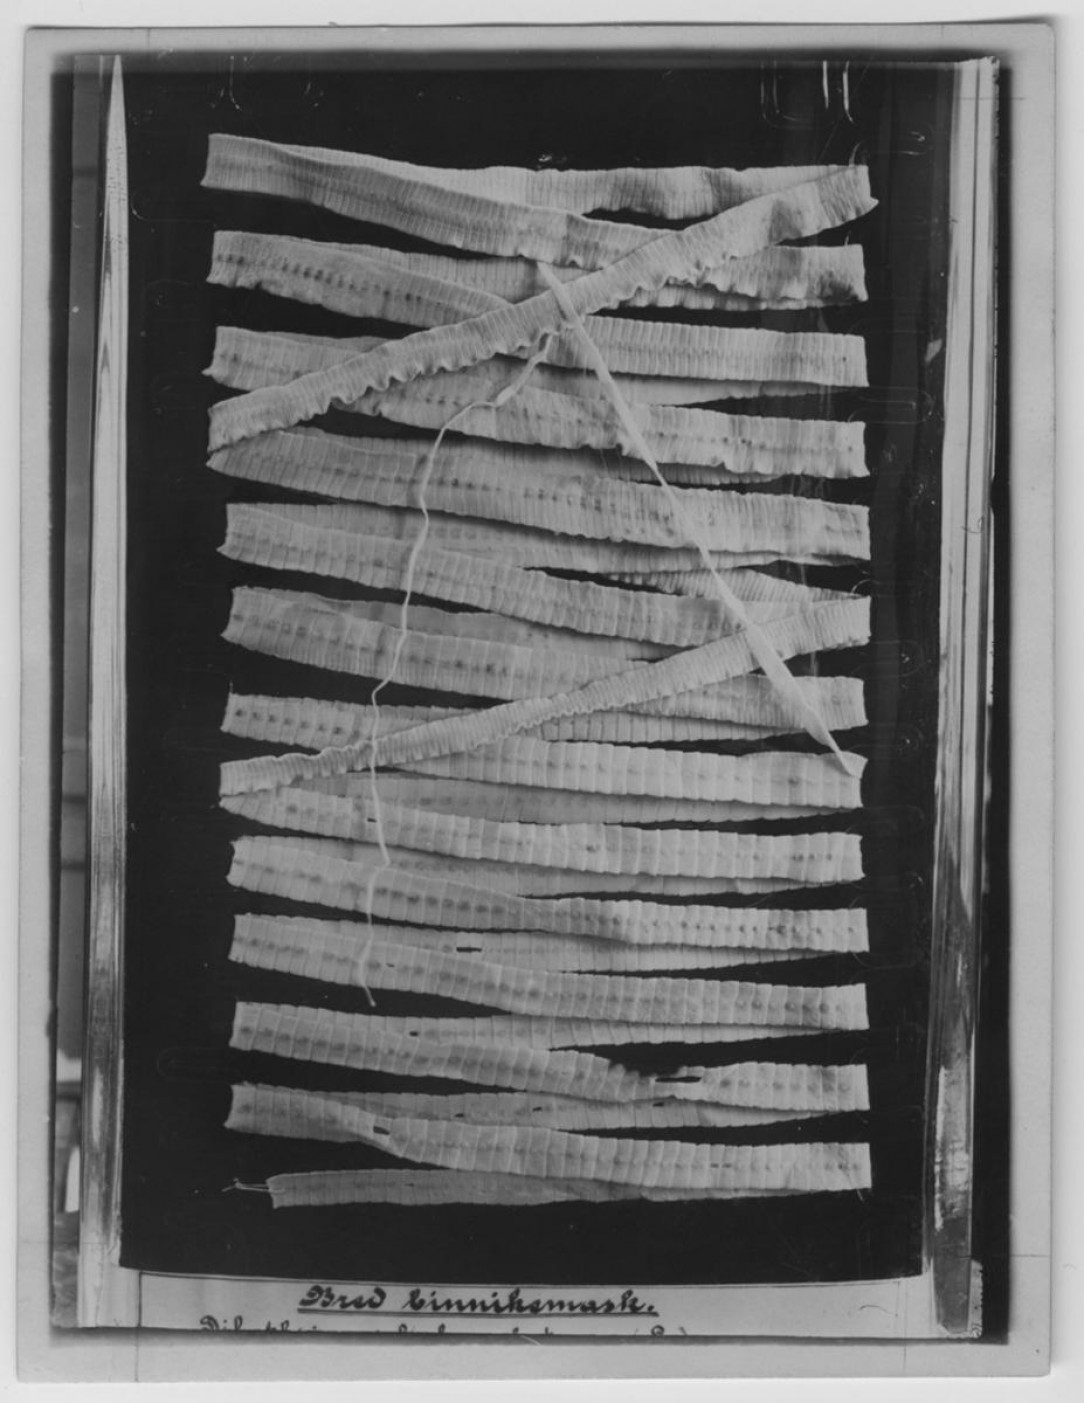 Tapeworm from a human - 382 cm (12.5 ft) long